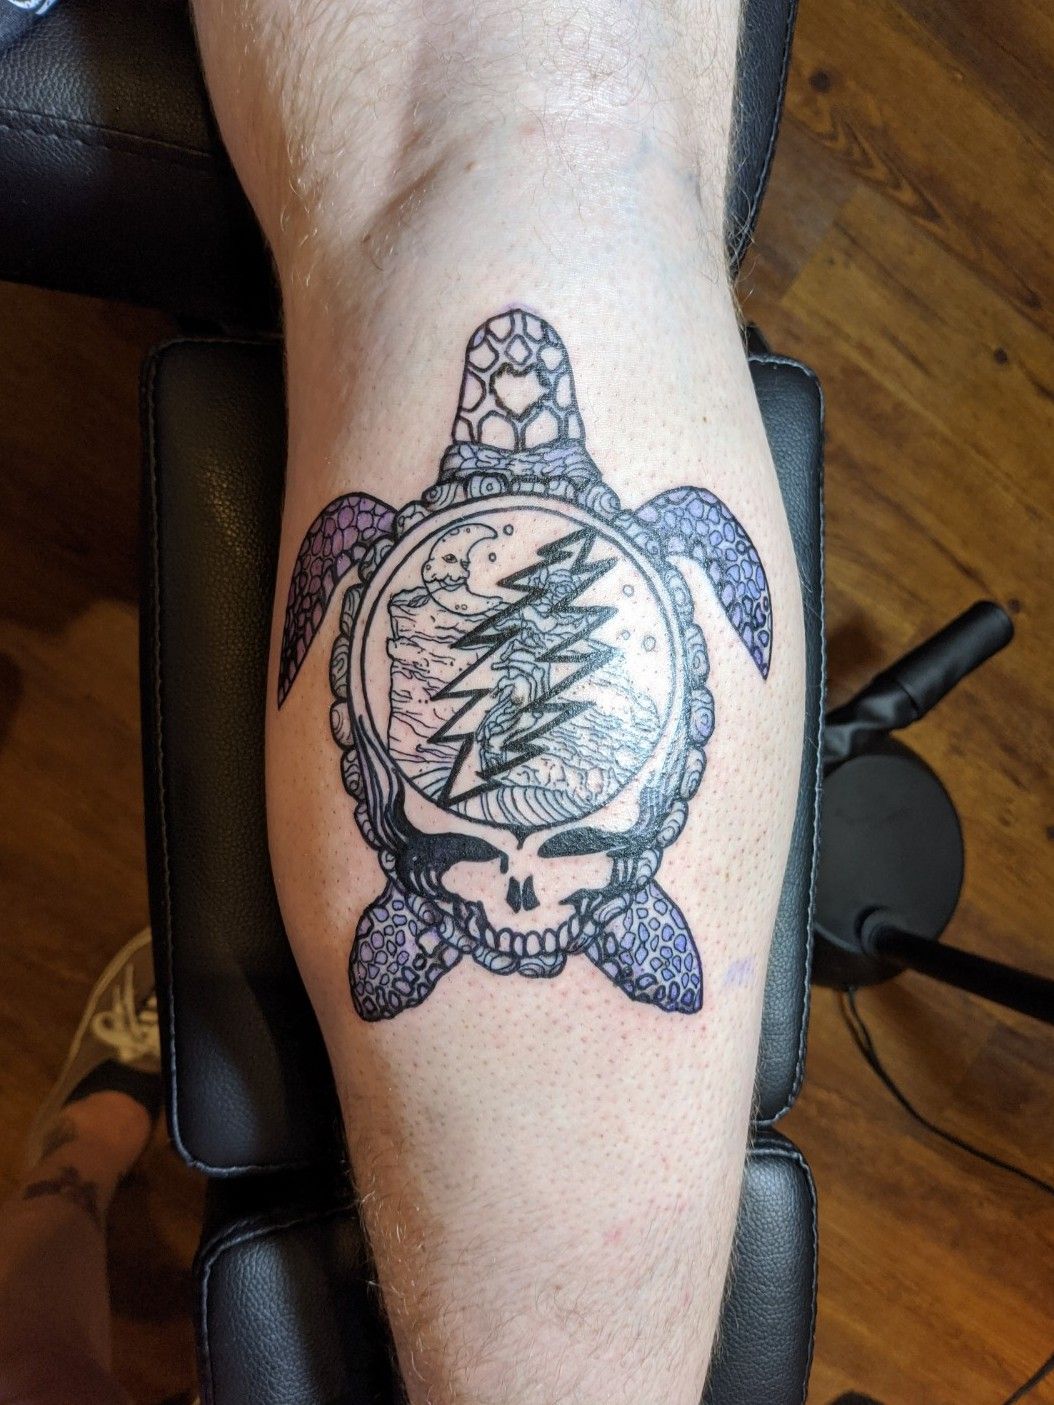 Grateful Deads Steal Your Face symbol tattooed on